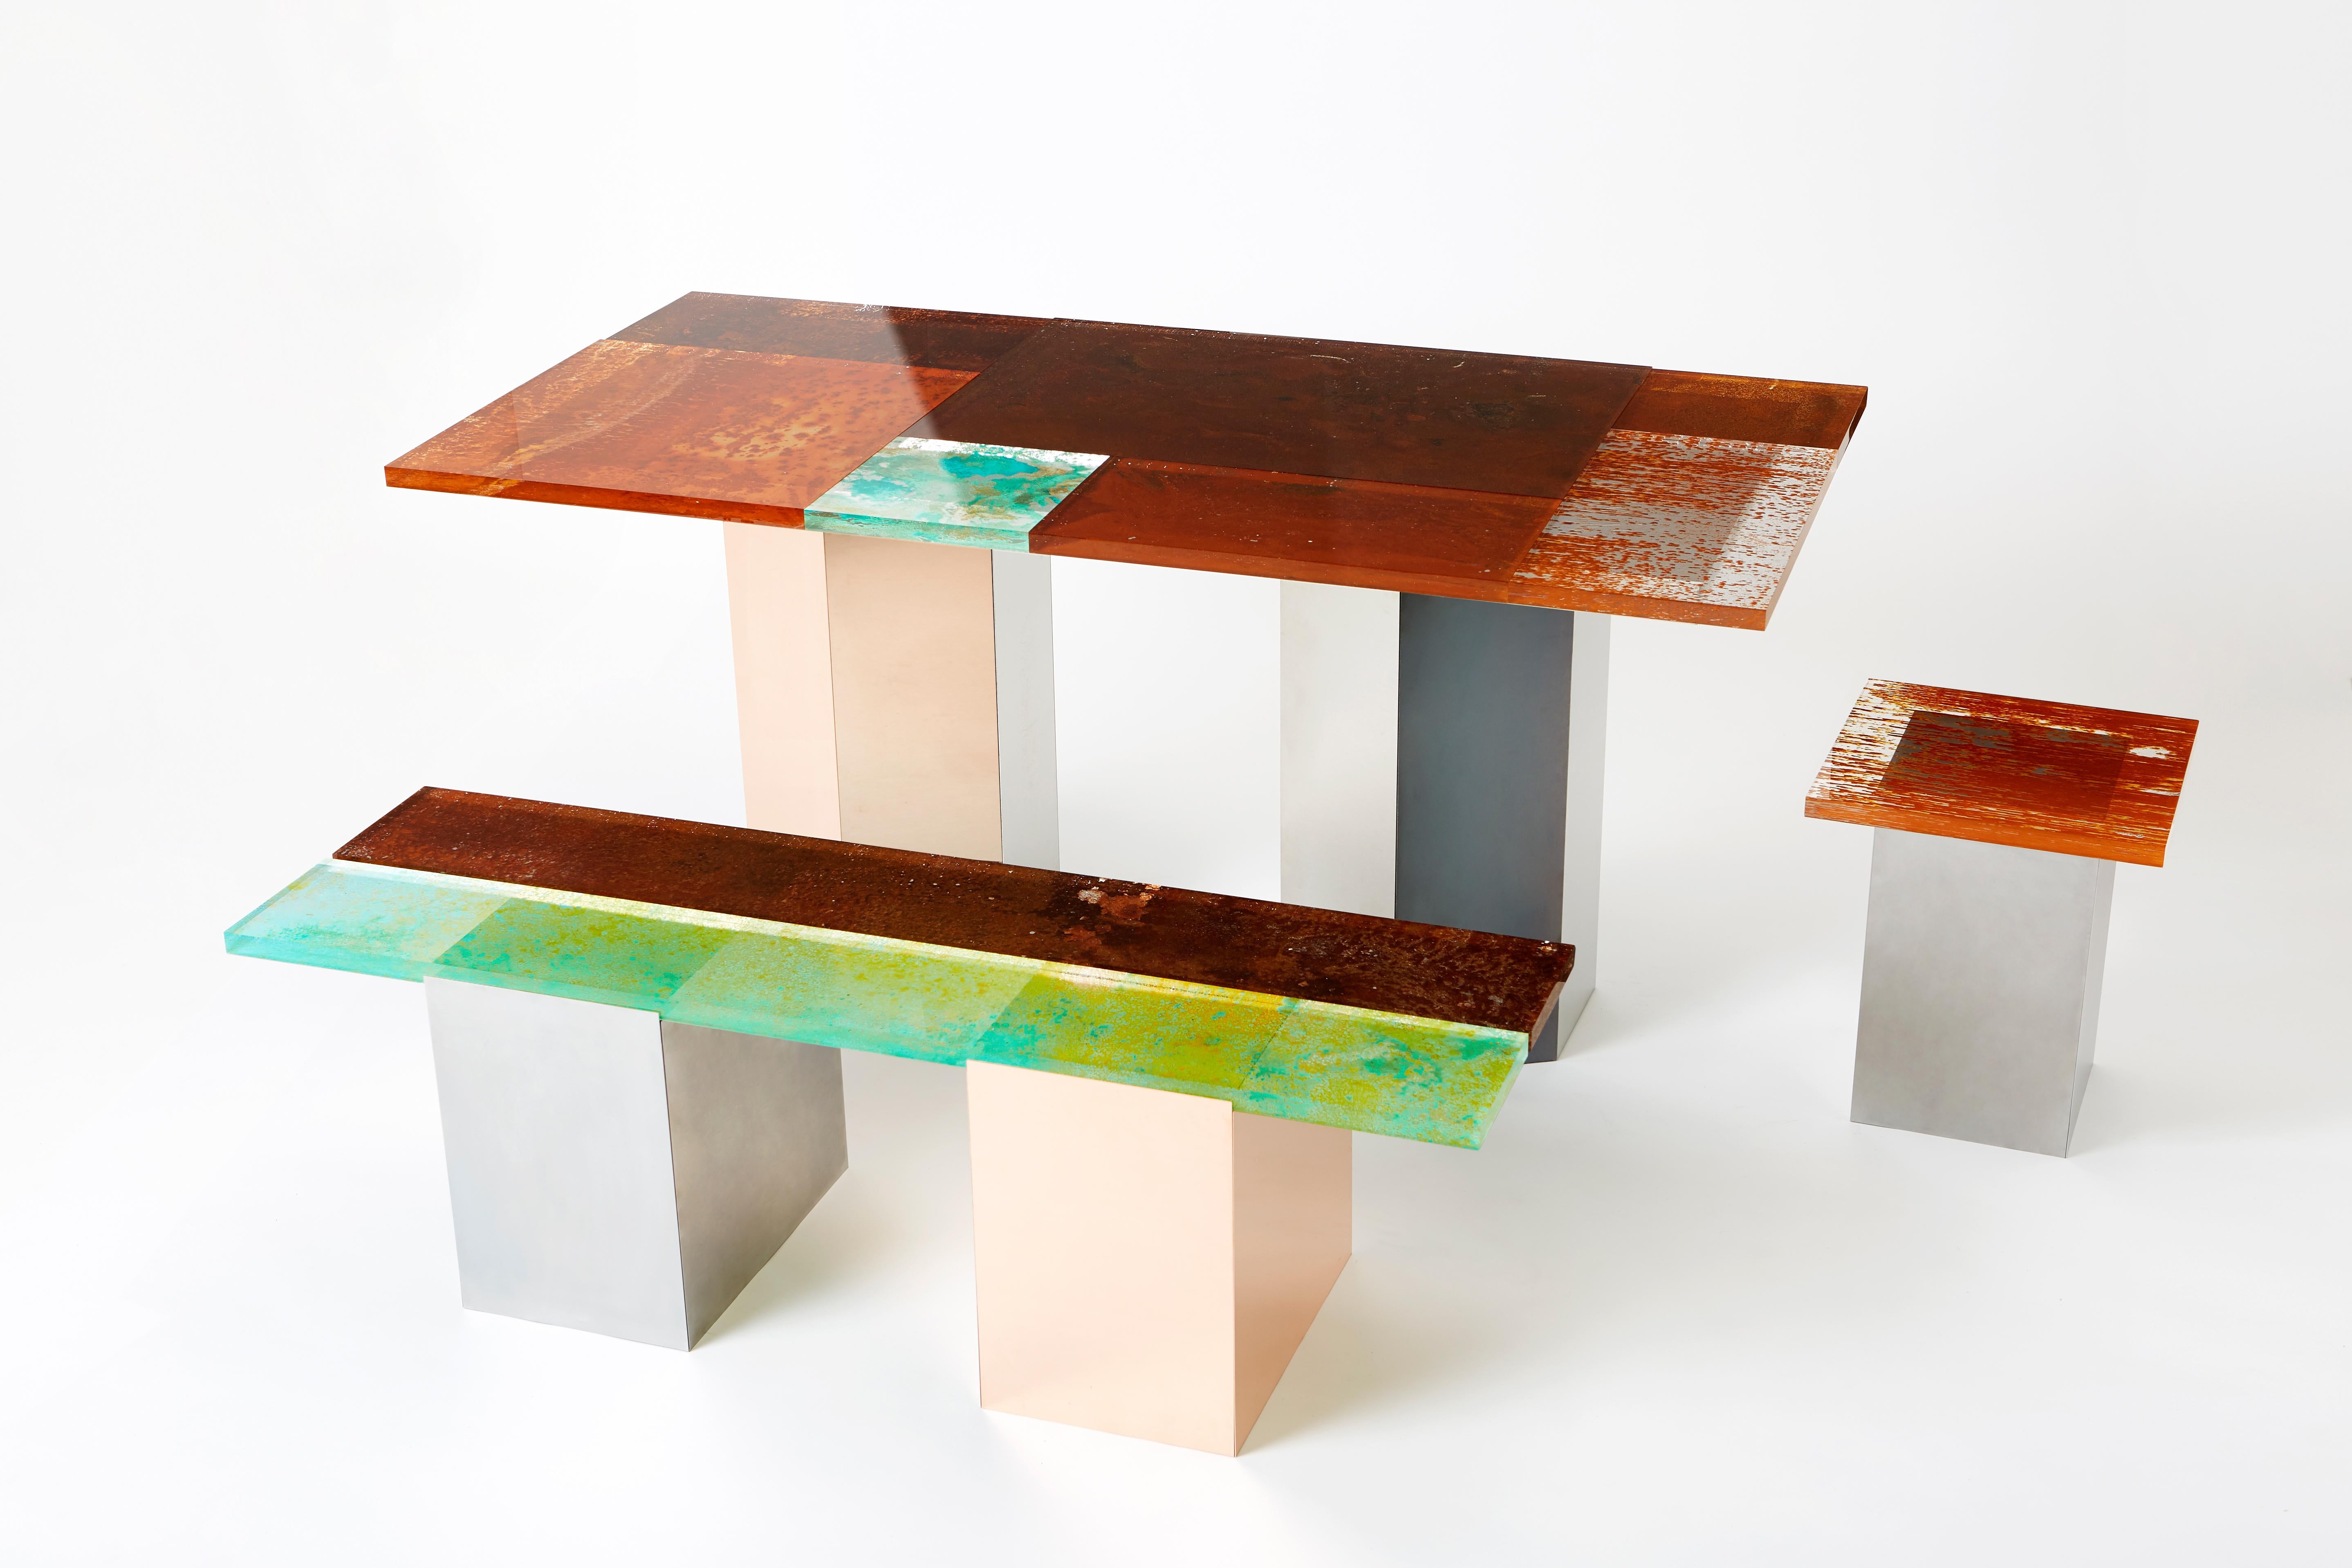 Yuma Kano Rust Harvest Dining Table Acrylic In New Condition For Sale In Shibuya-ku, Tokyo